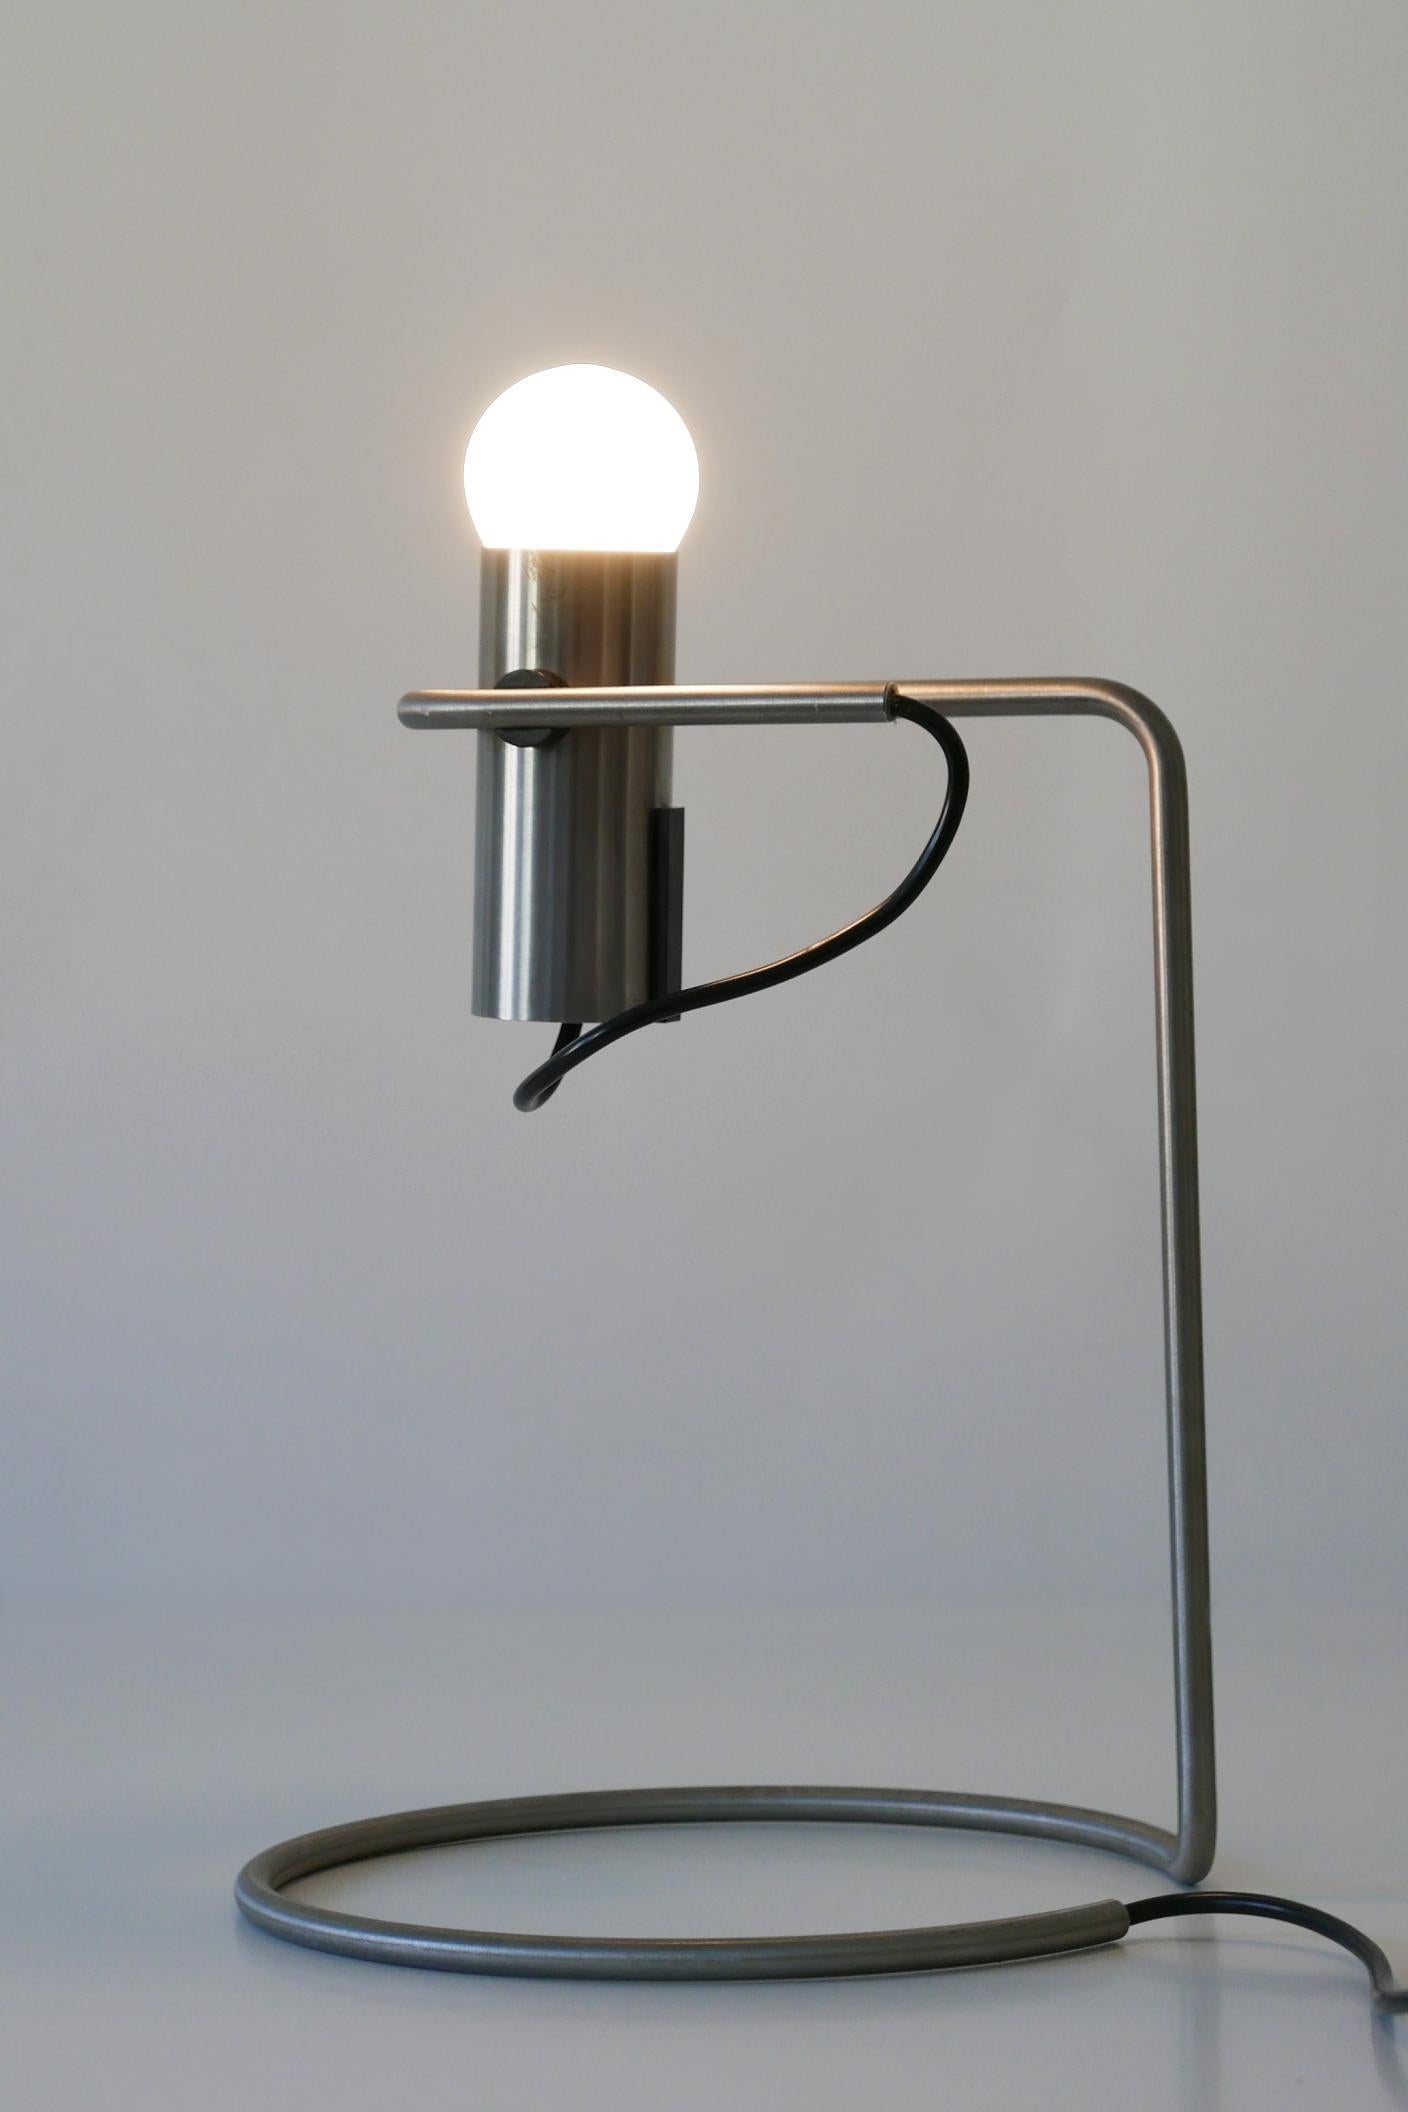 Exceptional Minimalistic Mid-Century Modern Table Lamp or Desk Light, 1960s For Sale 3